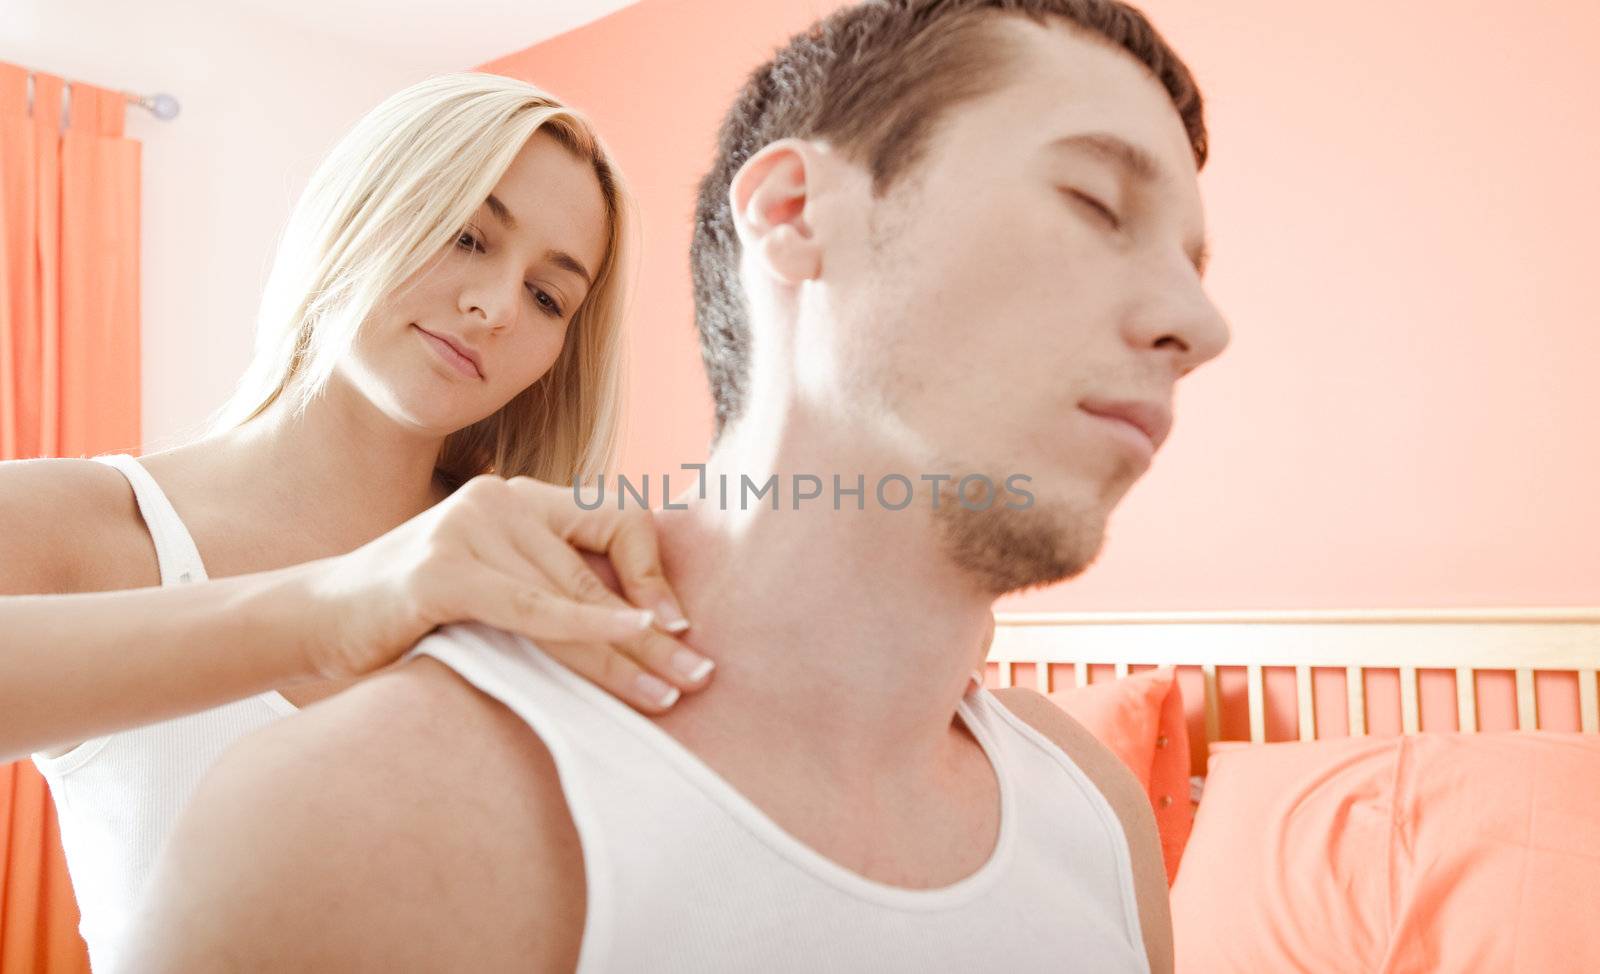 Man and woman sit on bed as woman massages man's shoulders. Horizontal format.